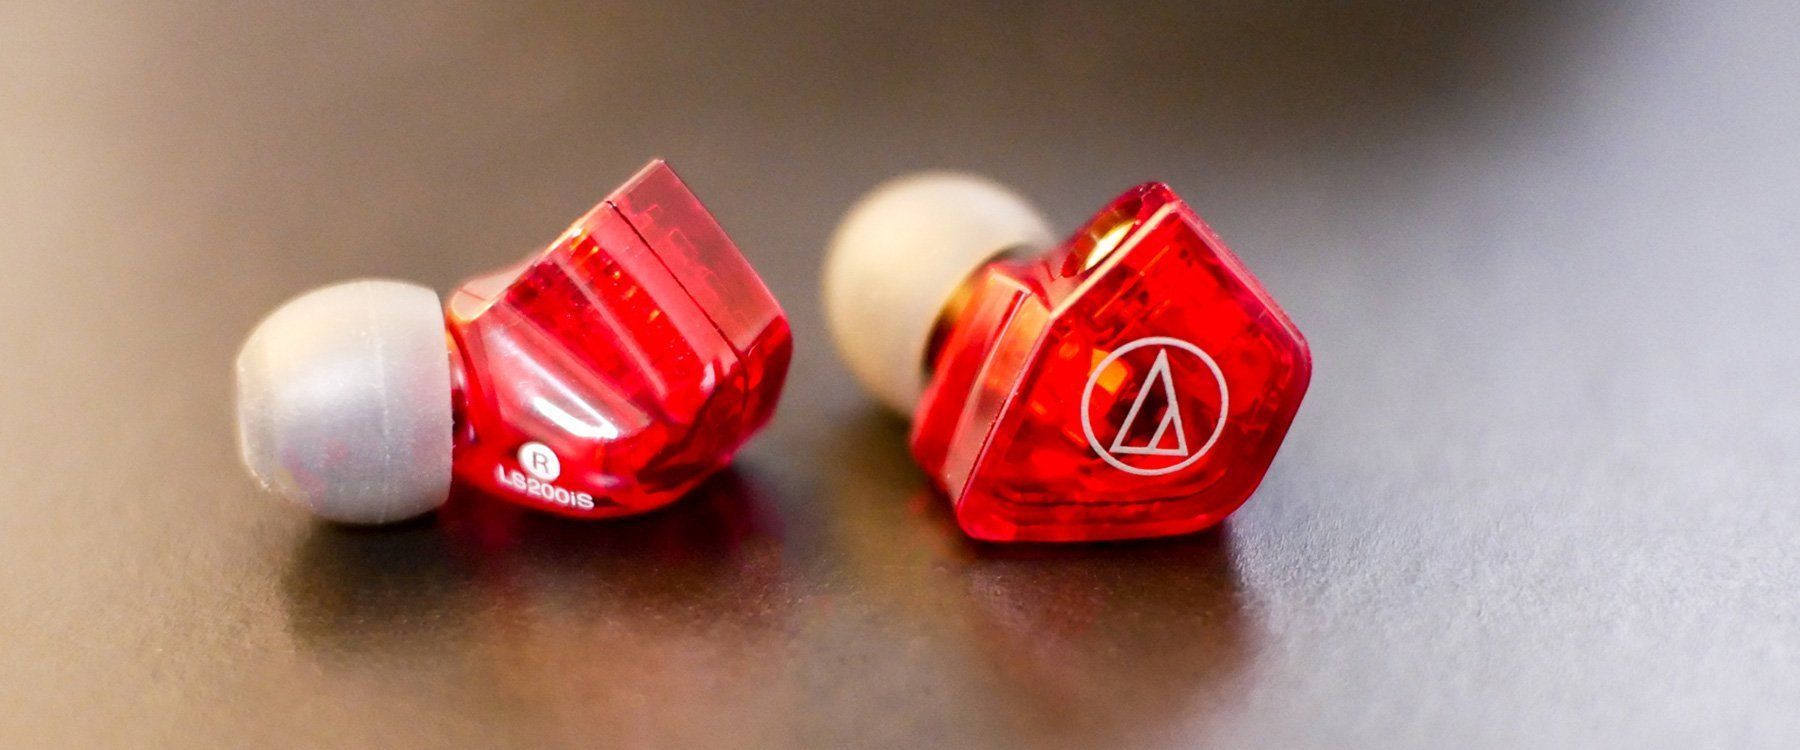 Audio-Technica LS200is - In Ear Monitor - Review